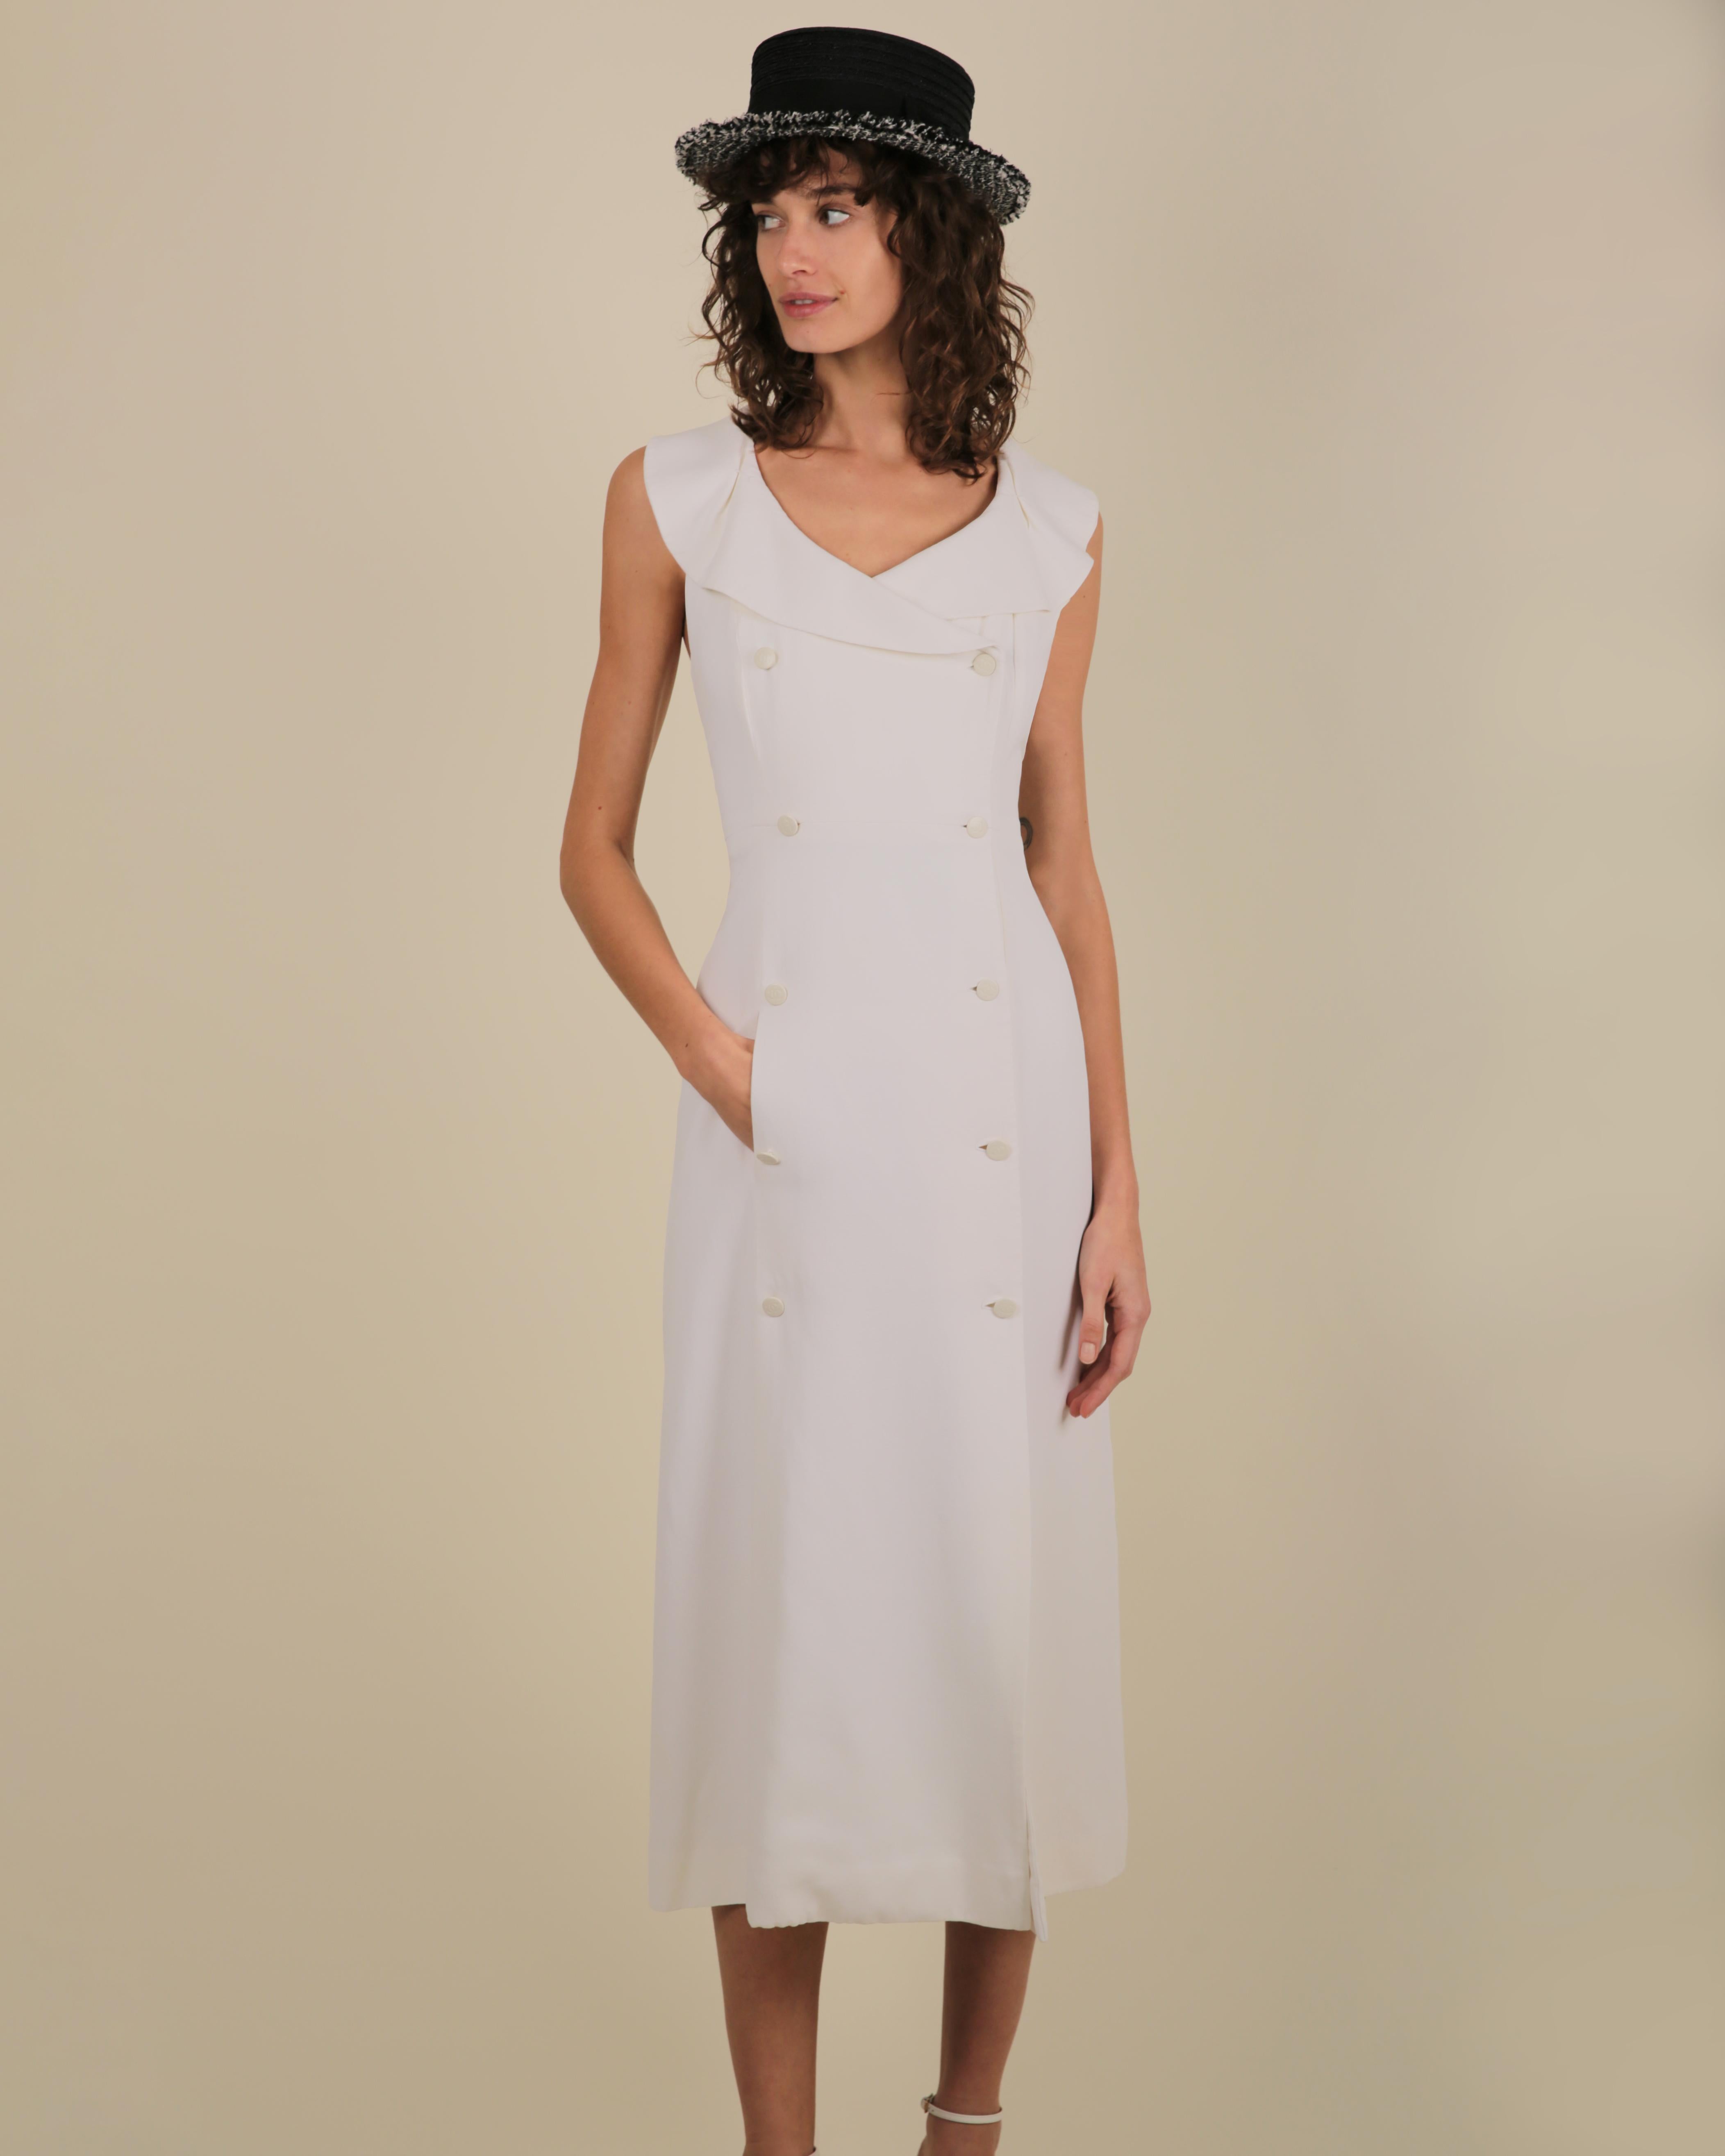 Chanel cruise 1997 vintage white wedding midi dress with logo button up front   For Sale 1